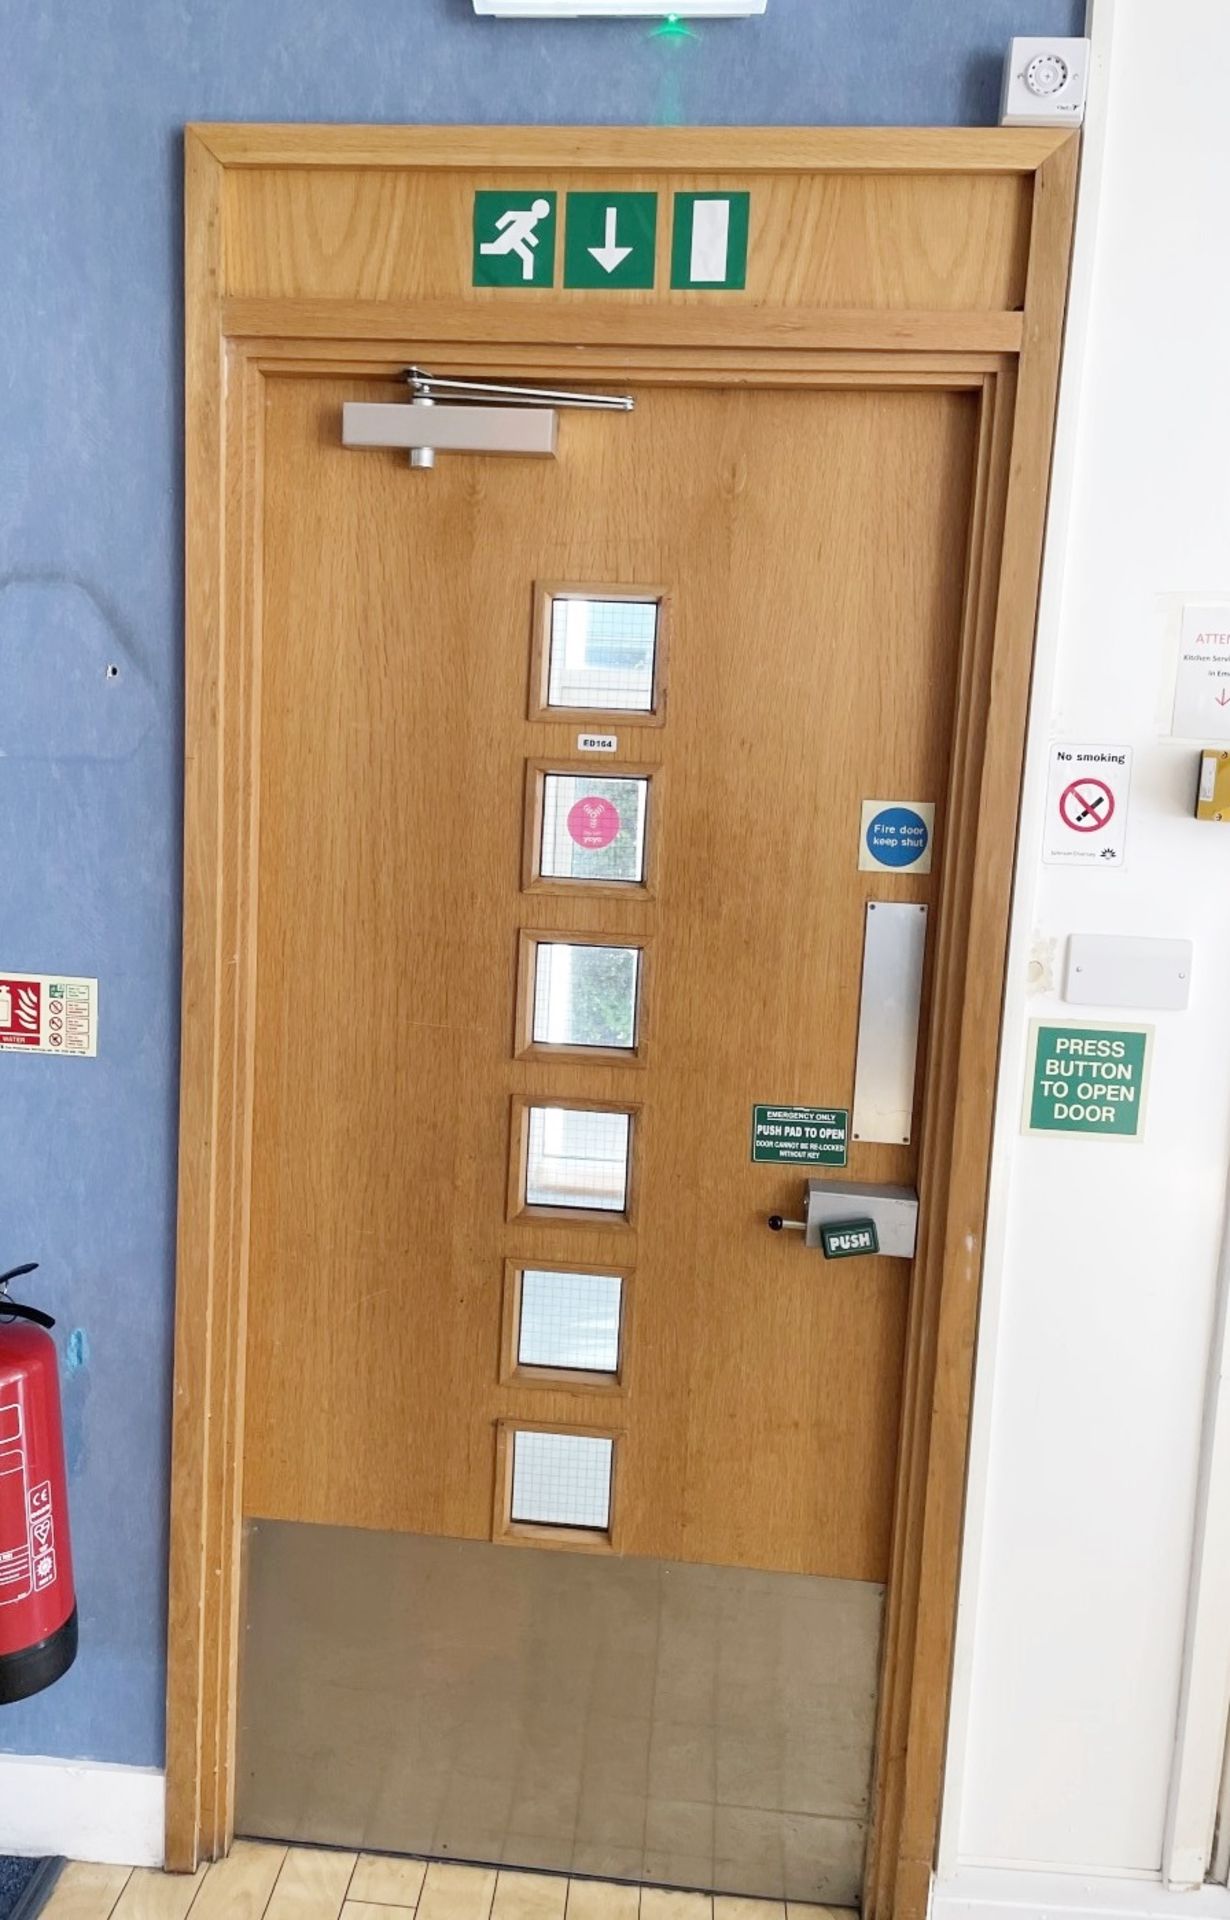 1 x Fire Door With Frame, Closer And Push To Open Button Emergency Pad - Dimensions: W104 x H229cm - - Image 2 of 6